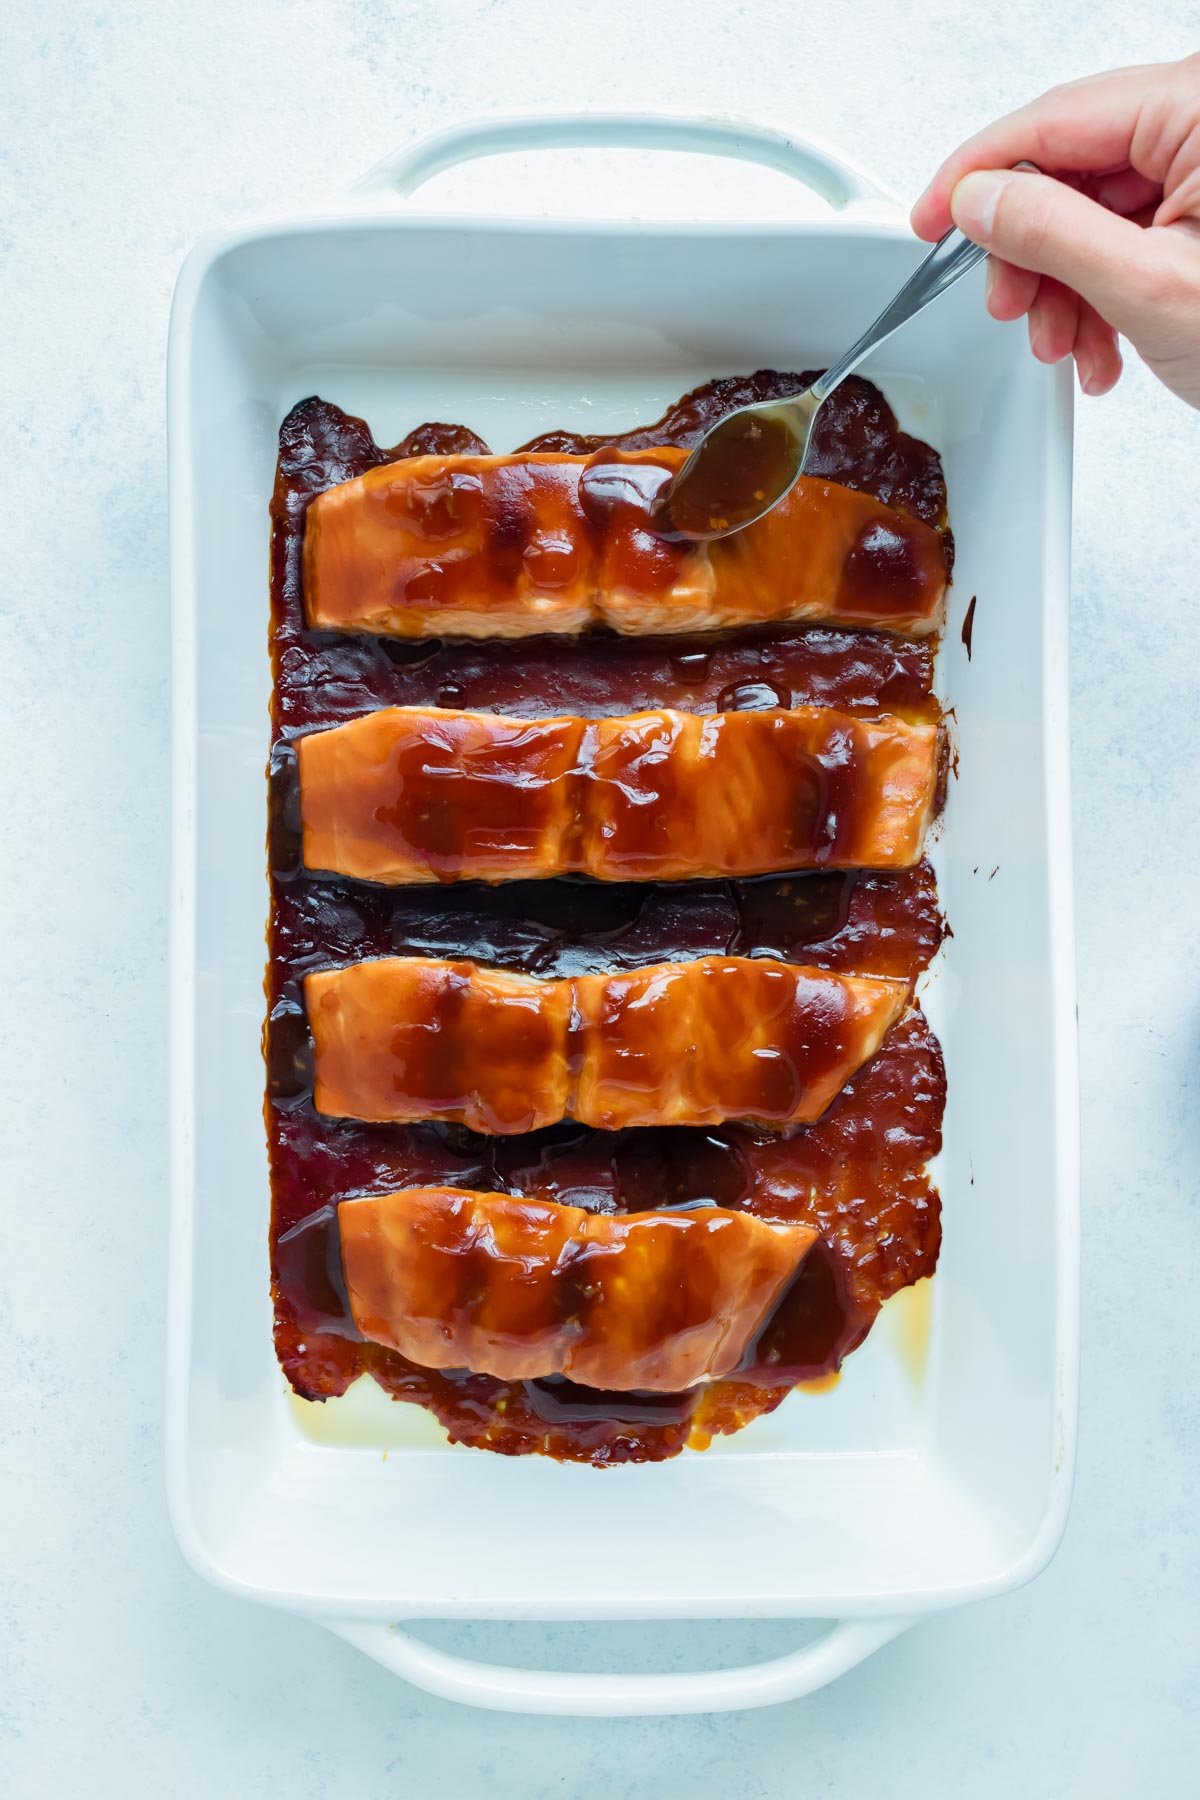 Teriyaki sauce is added to the salmon filets before being baked in the oven.